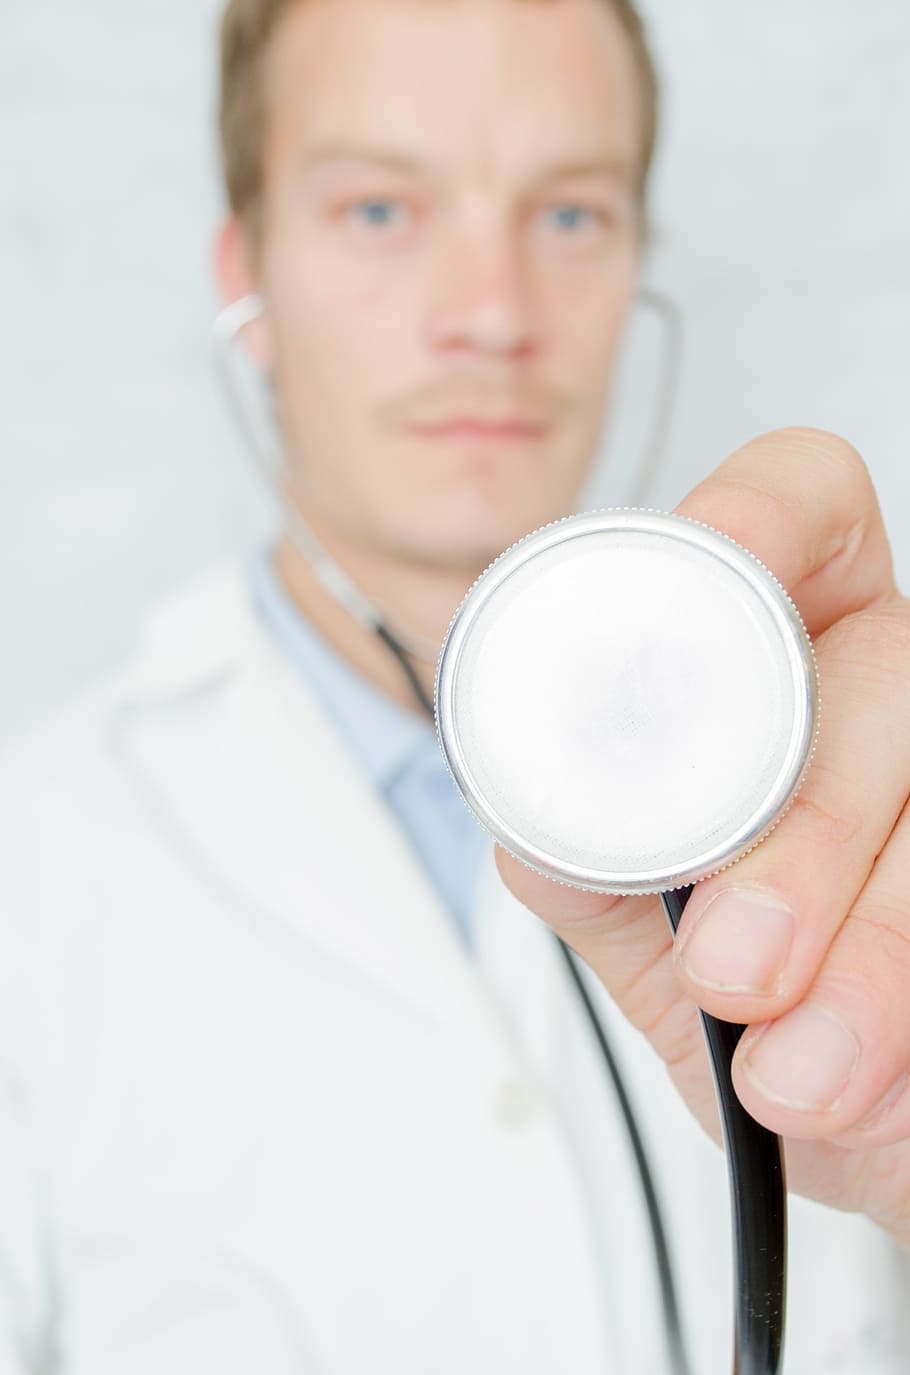 man holding stethoscope, cardiac, people, doctor cardio, cardiology, check, checkup, clean, clinical, close-up